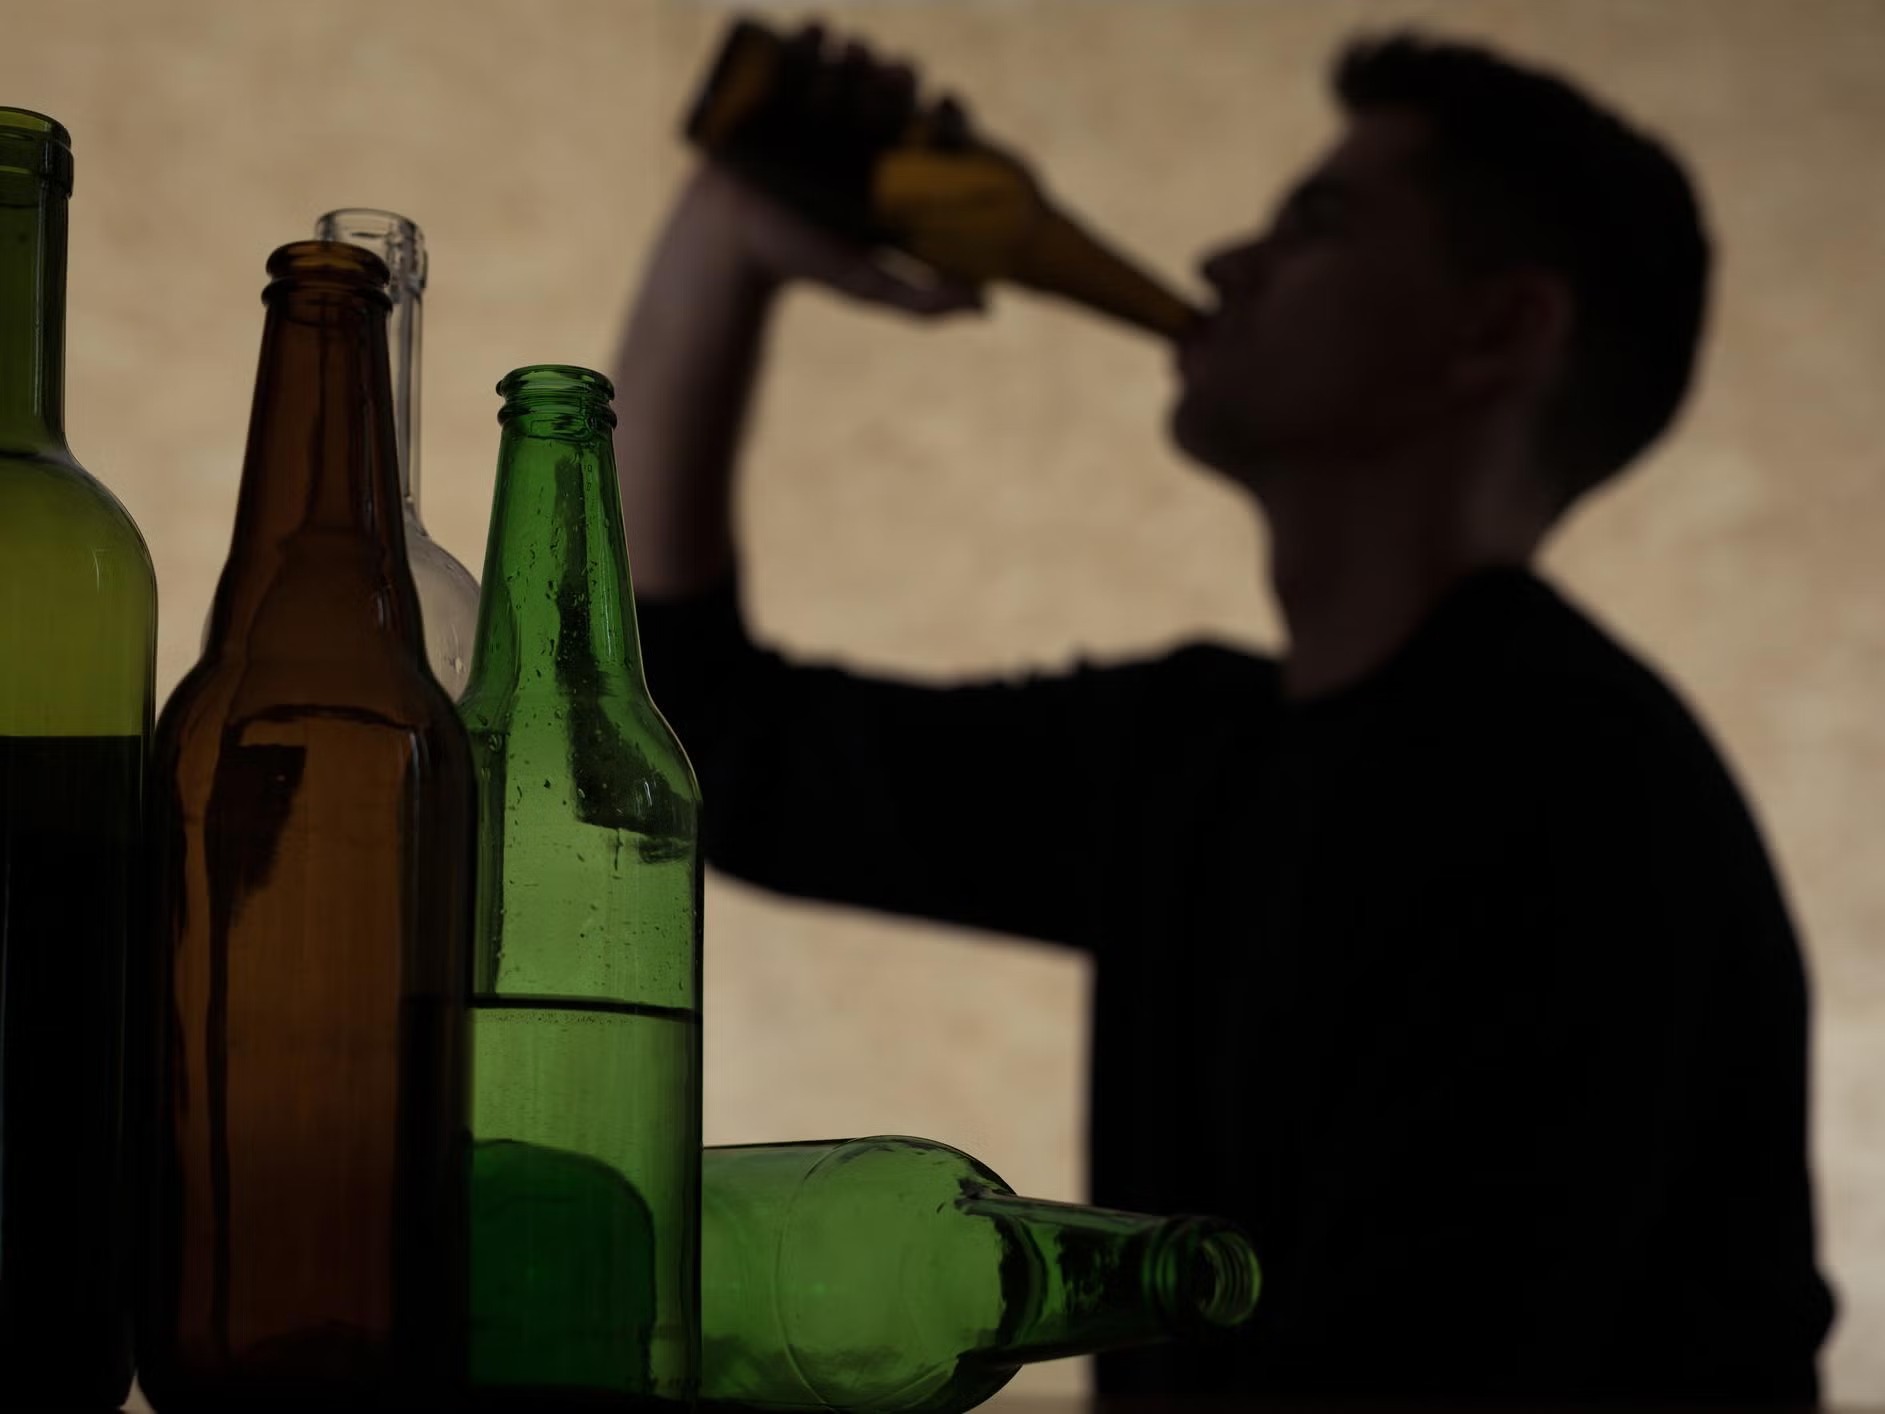 Alcohol withdrawal can cause vivid dreaming. Heavy alcohol use reduces the amount of REM sleep we experience each night, but that when we quit alcohol, REM sleep rebounds